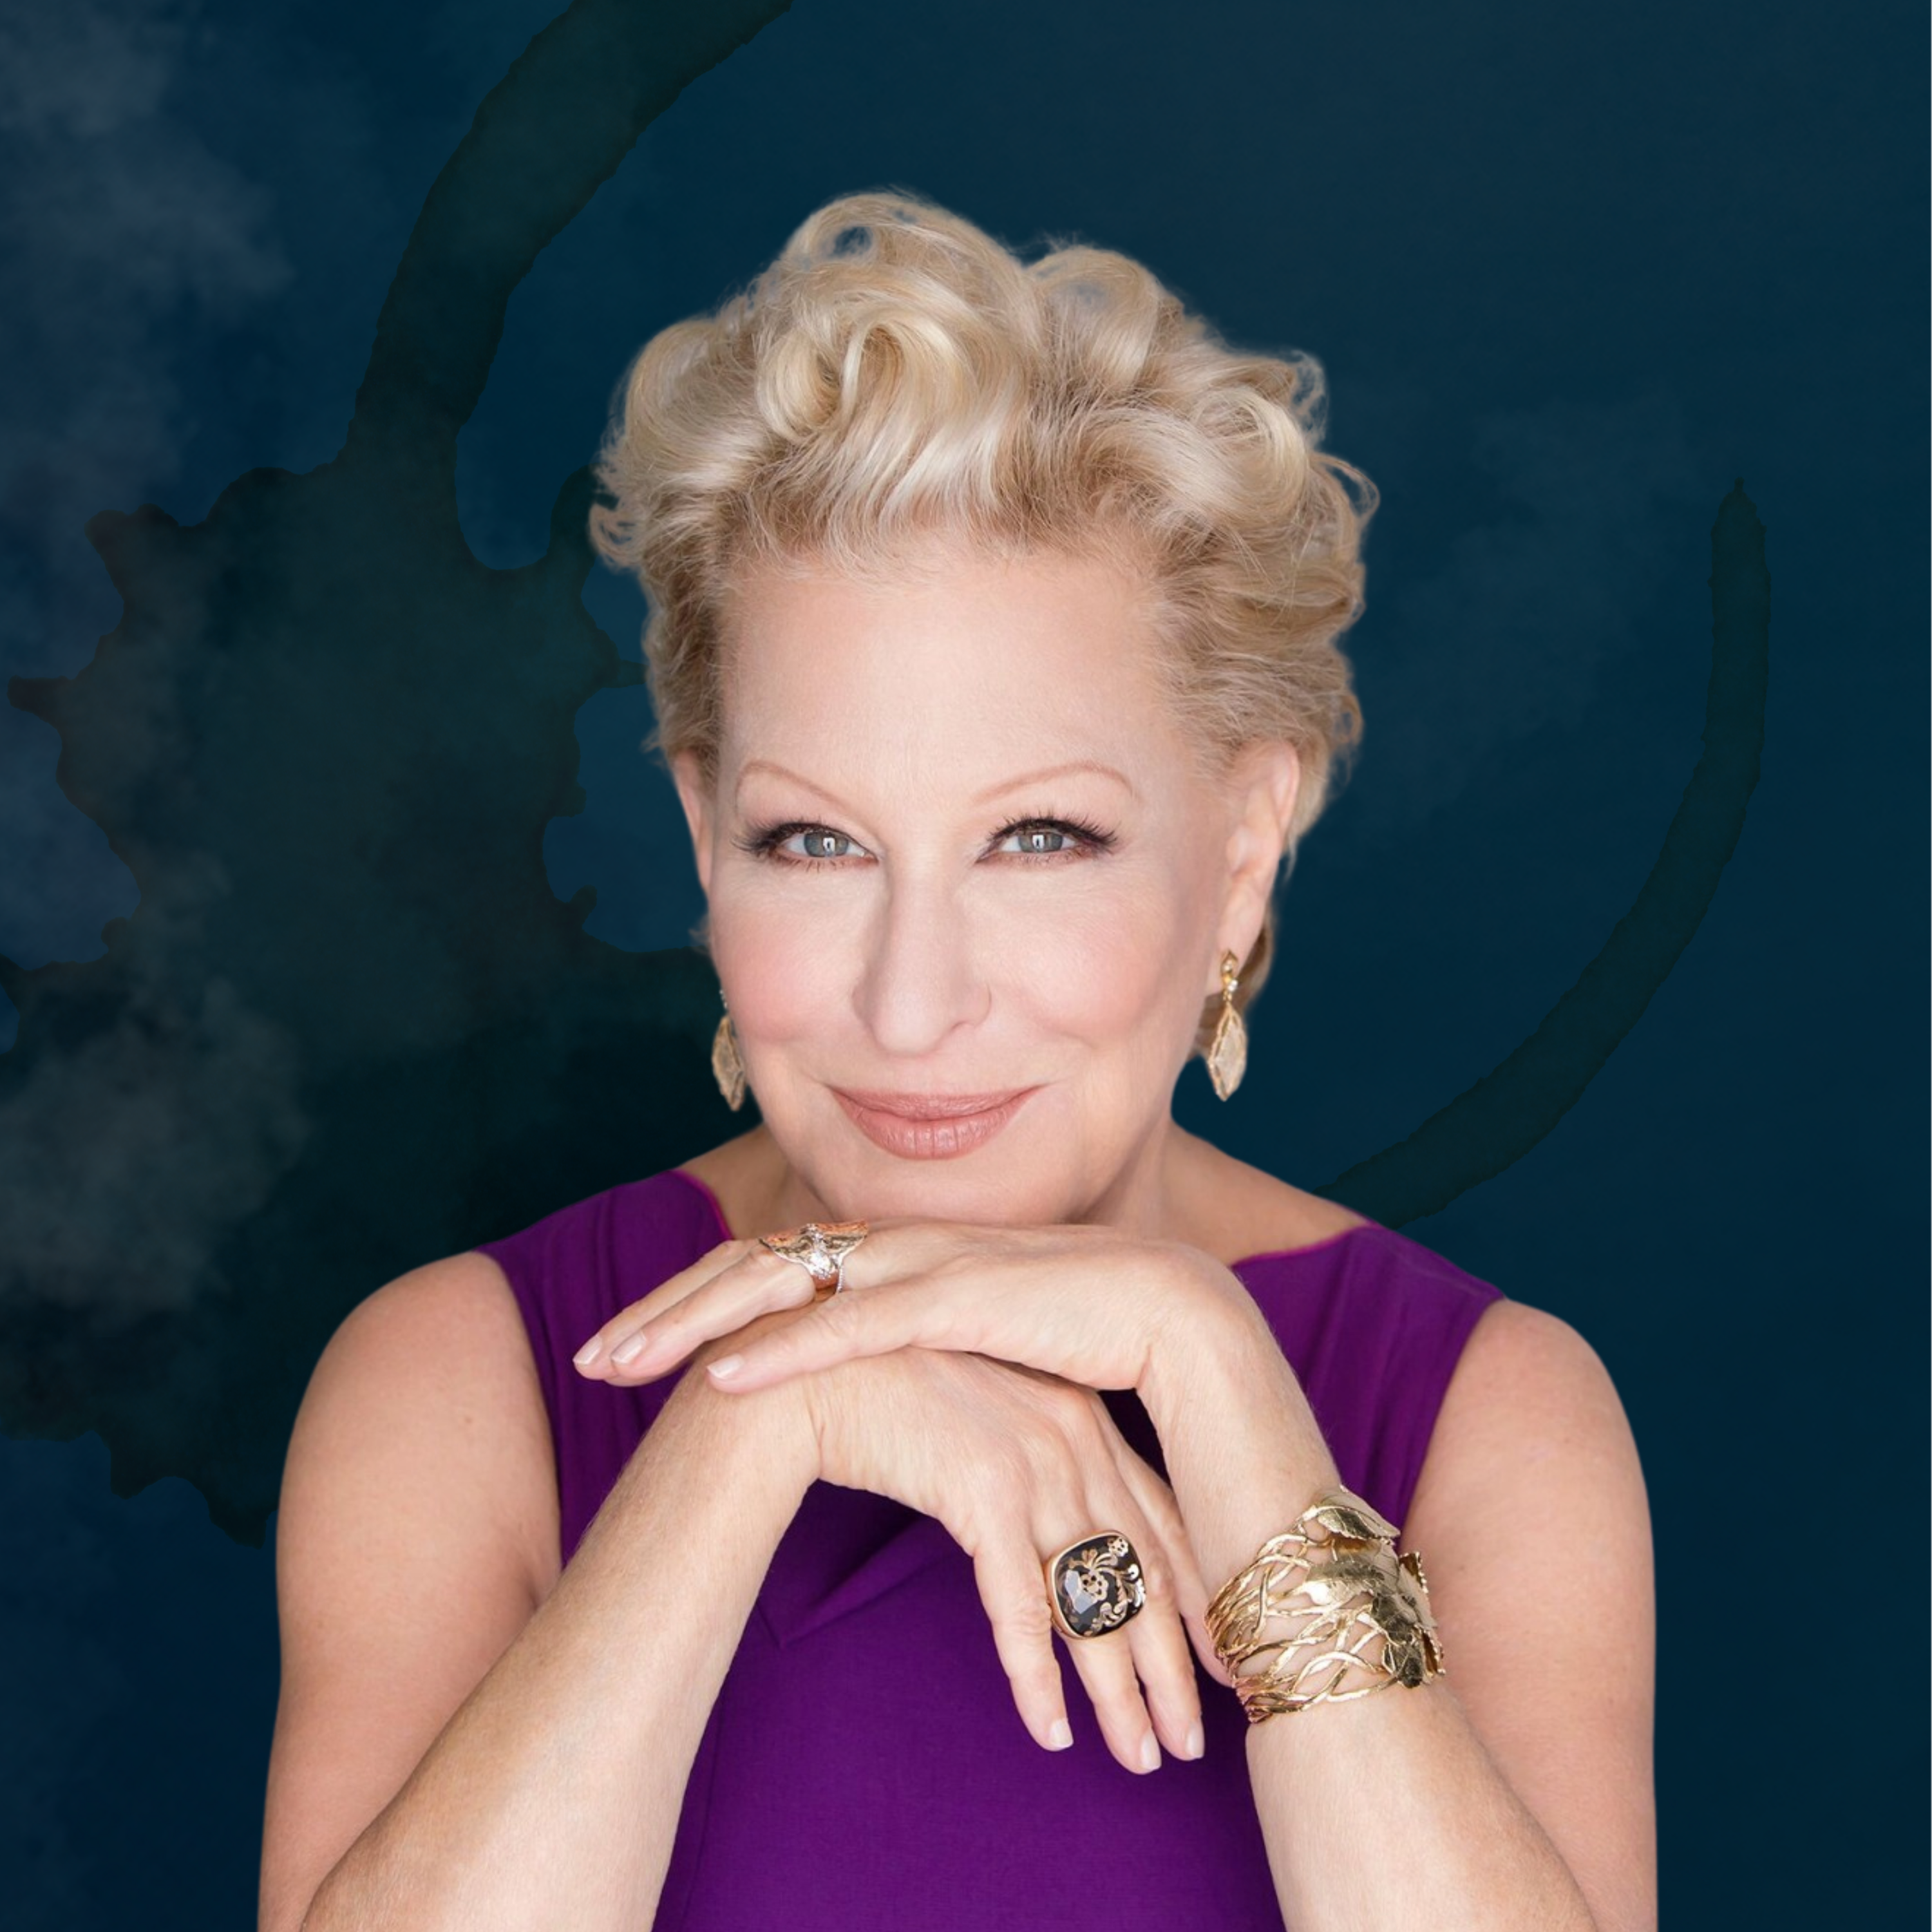 Bette Midler and the Meanest Man in Showbiz